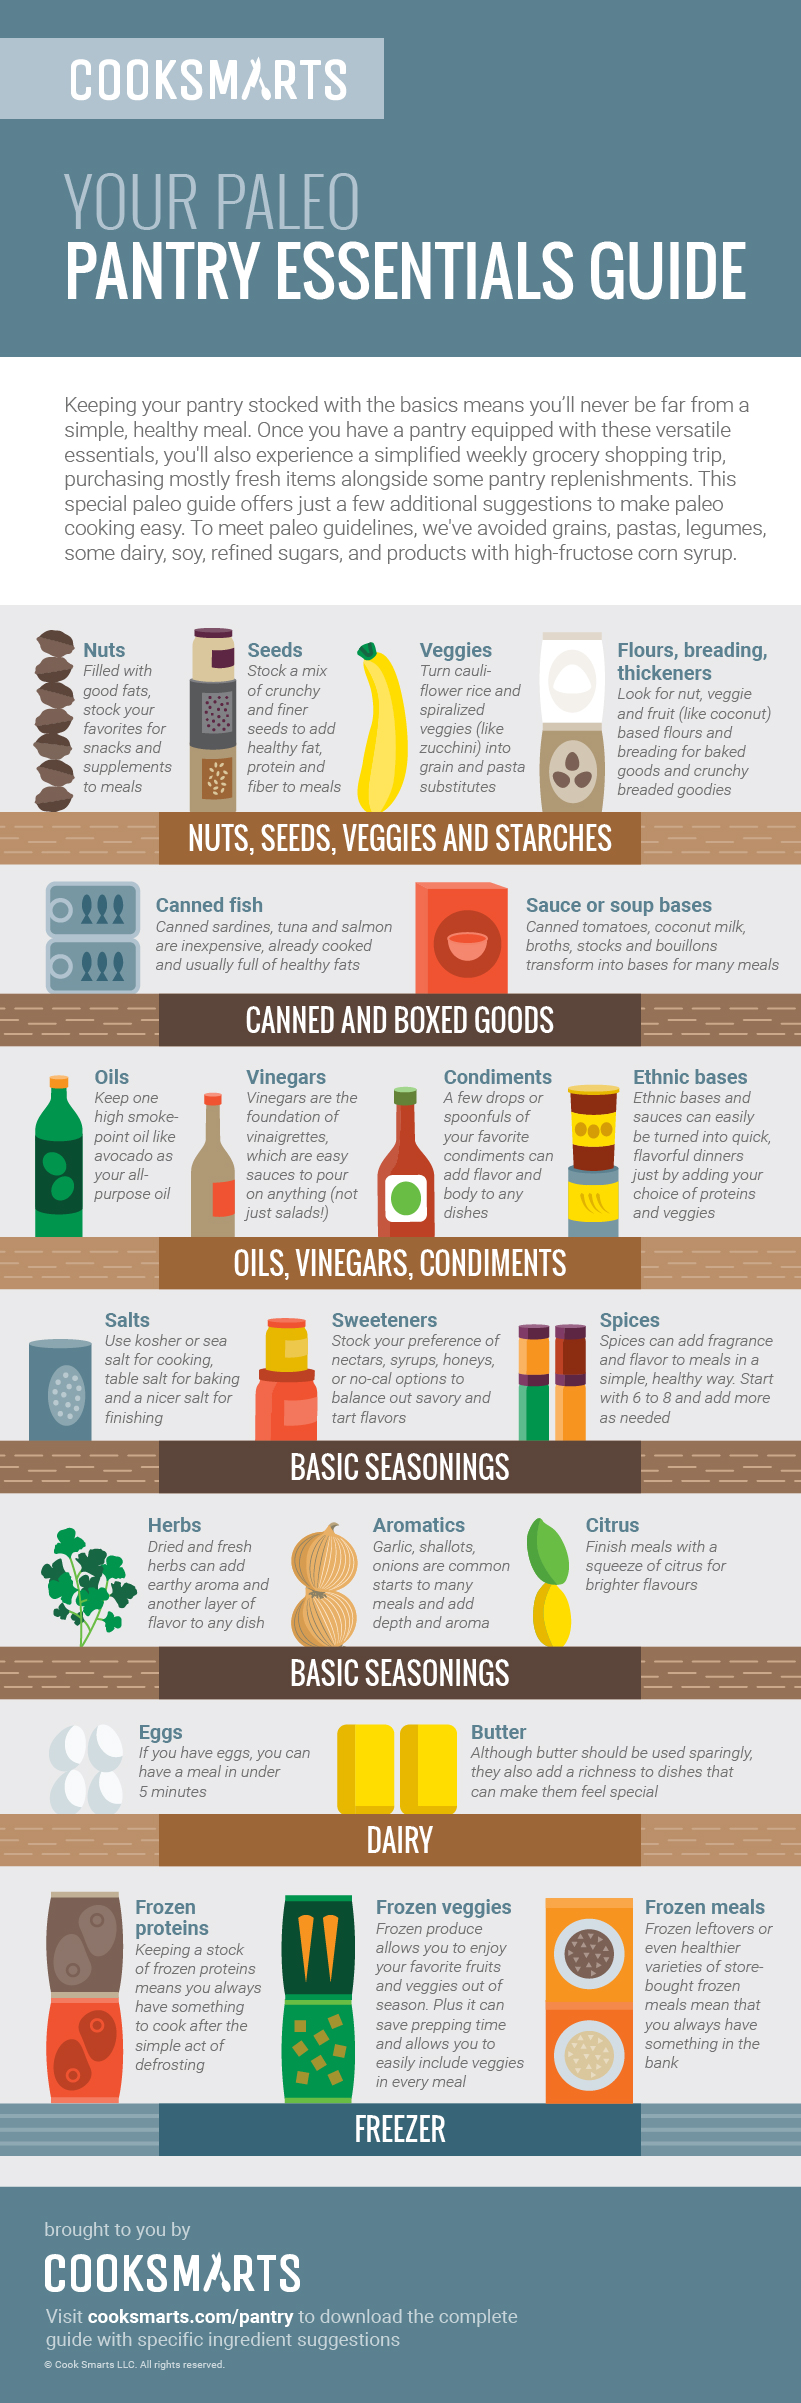 Guide to Paleo Pantry Essentials Infographic | Cook Smarts